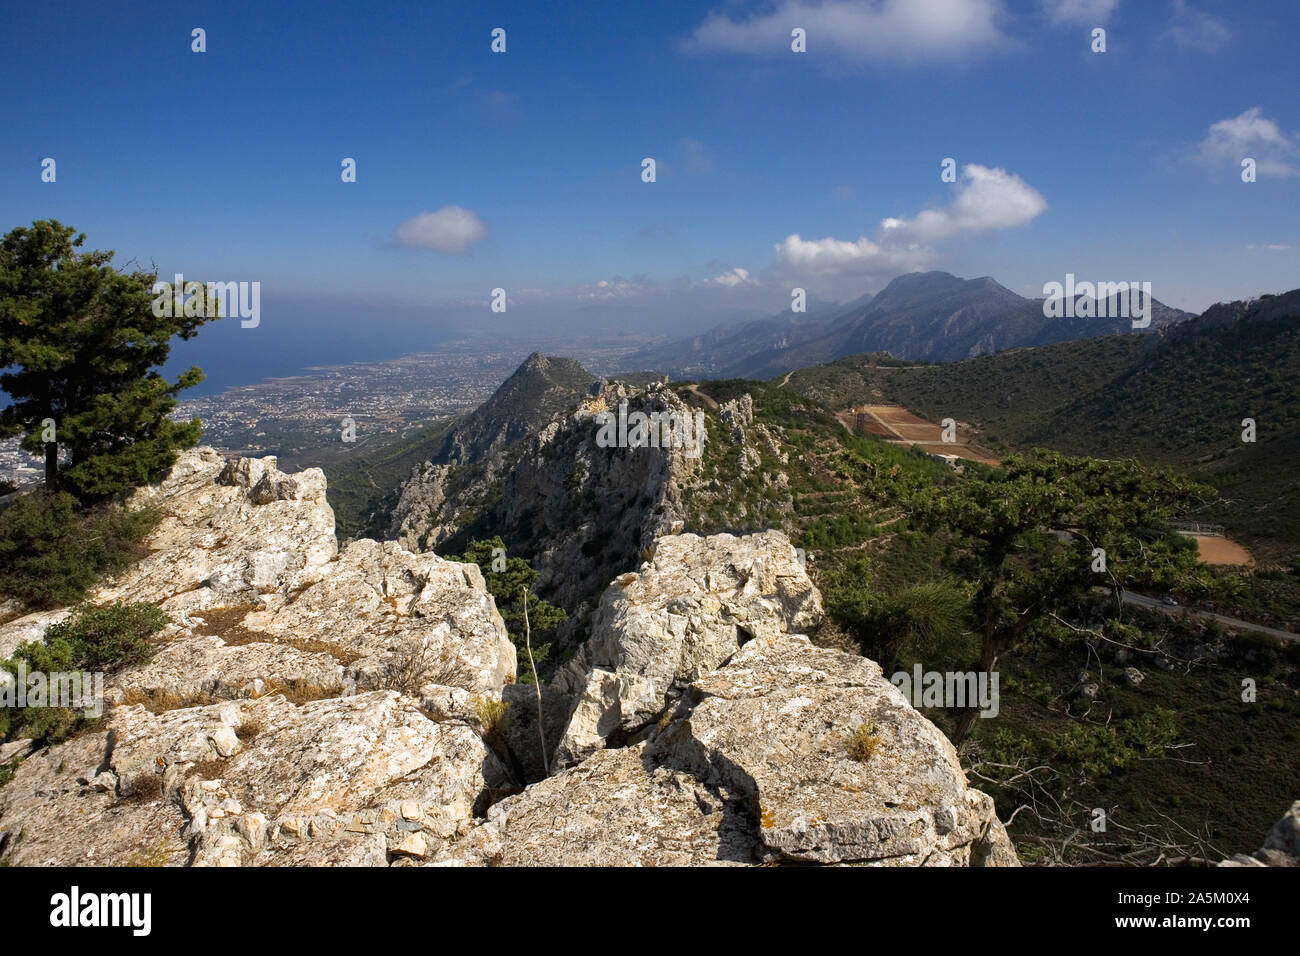 View over Kyrenia (aka Girne) looking east from Saint Hilarion Castle, Northern Cyprus Stock Photo